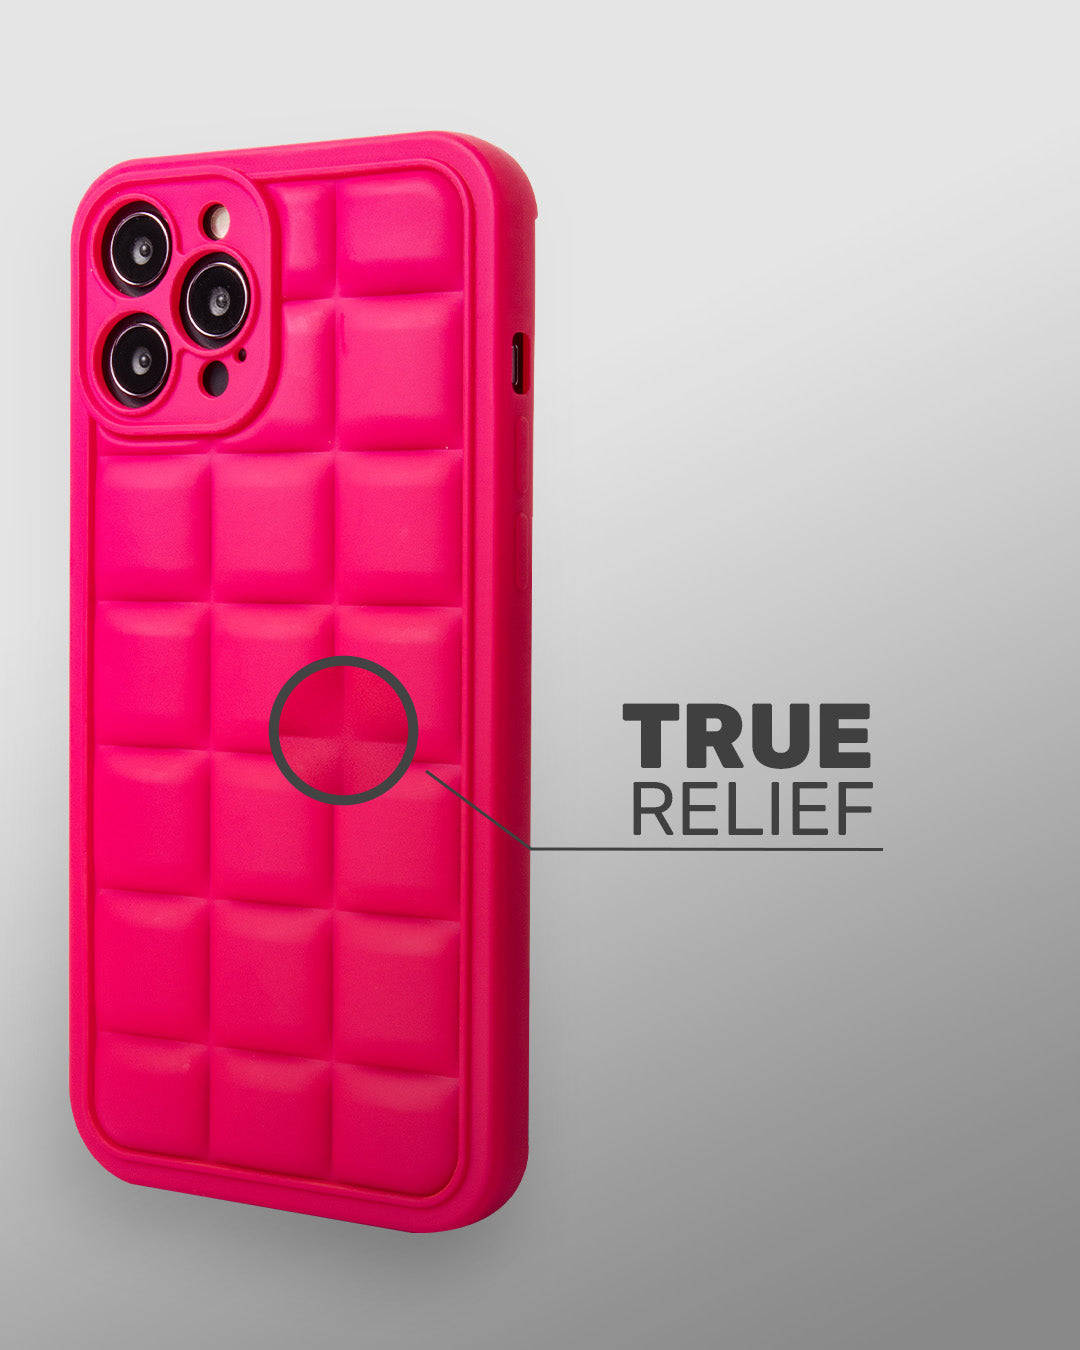 Pink Cube Iphone Case